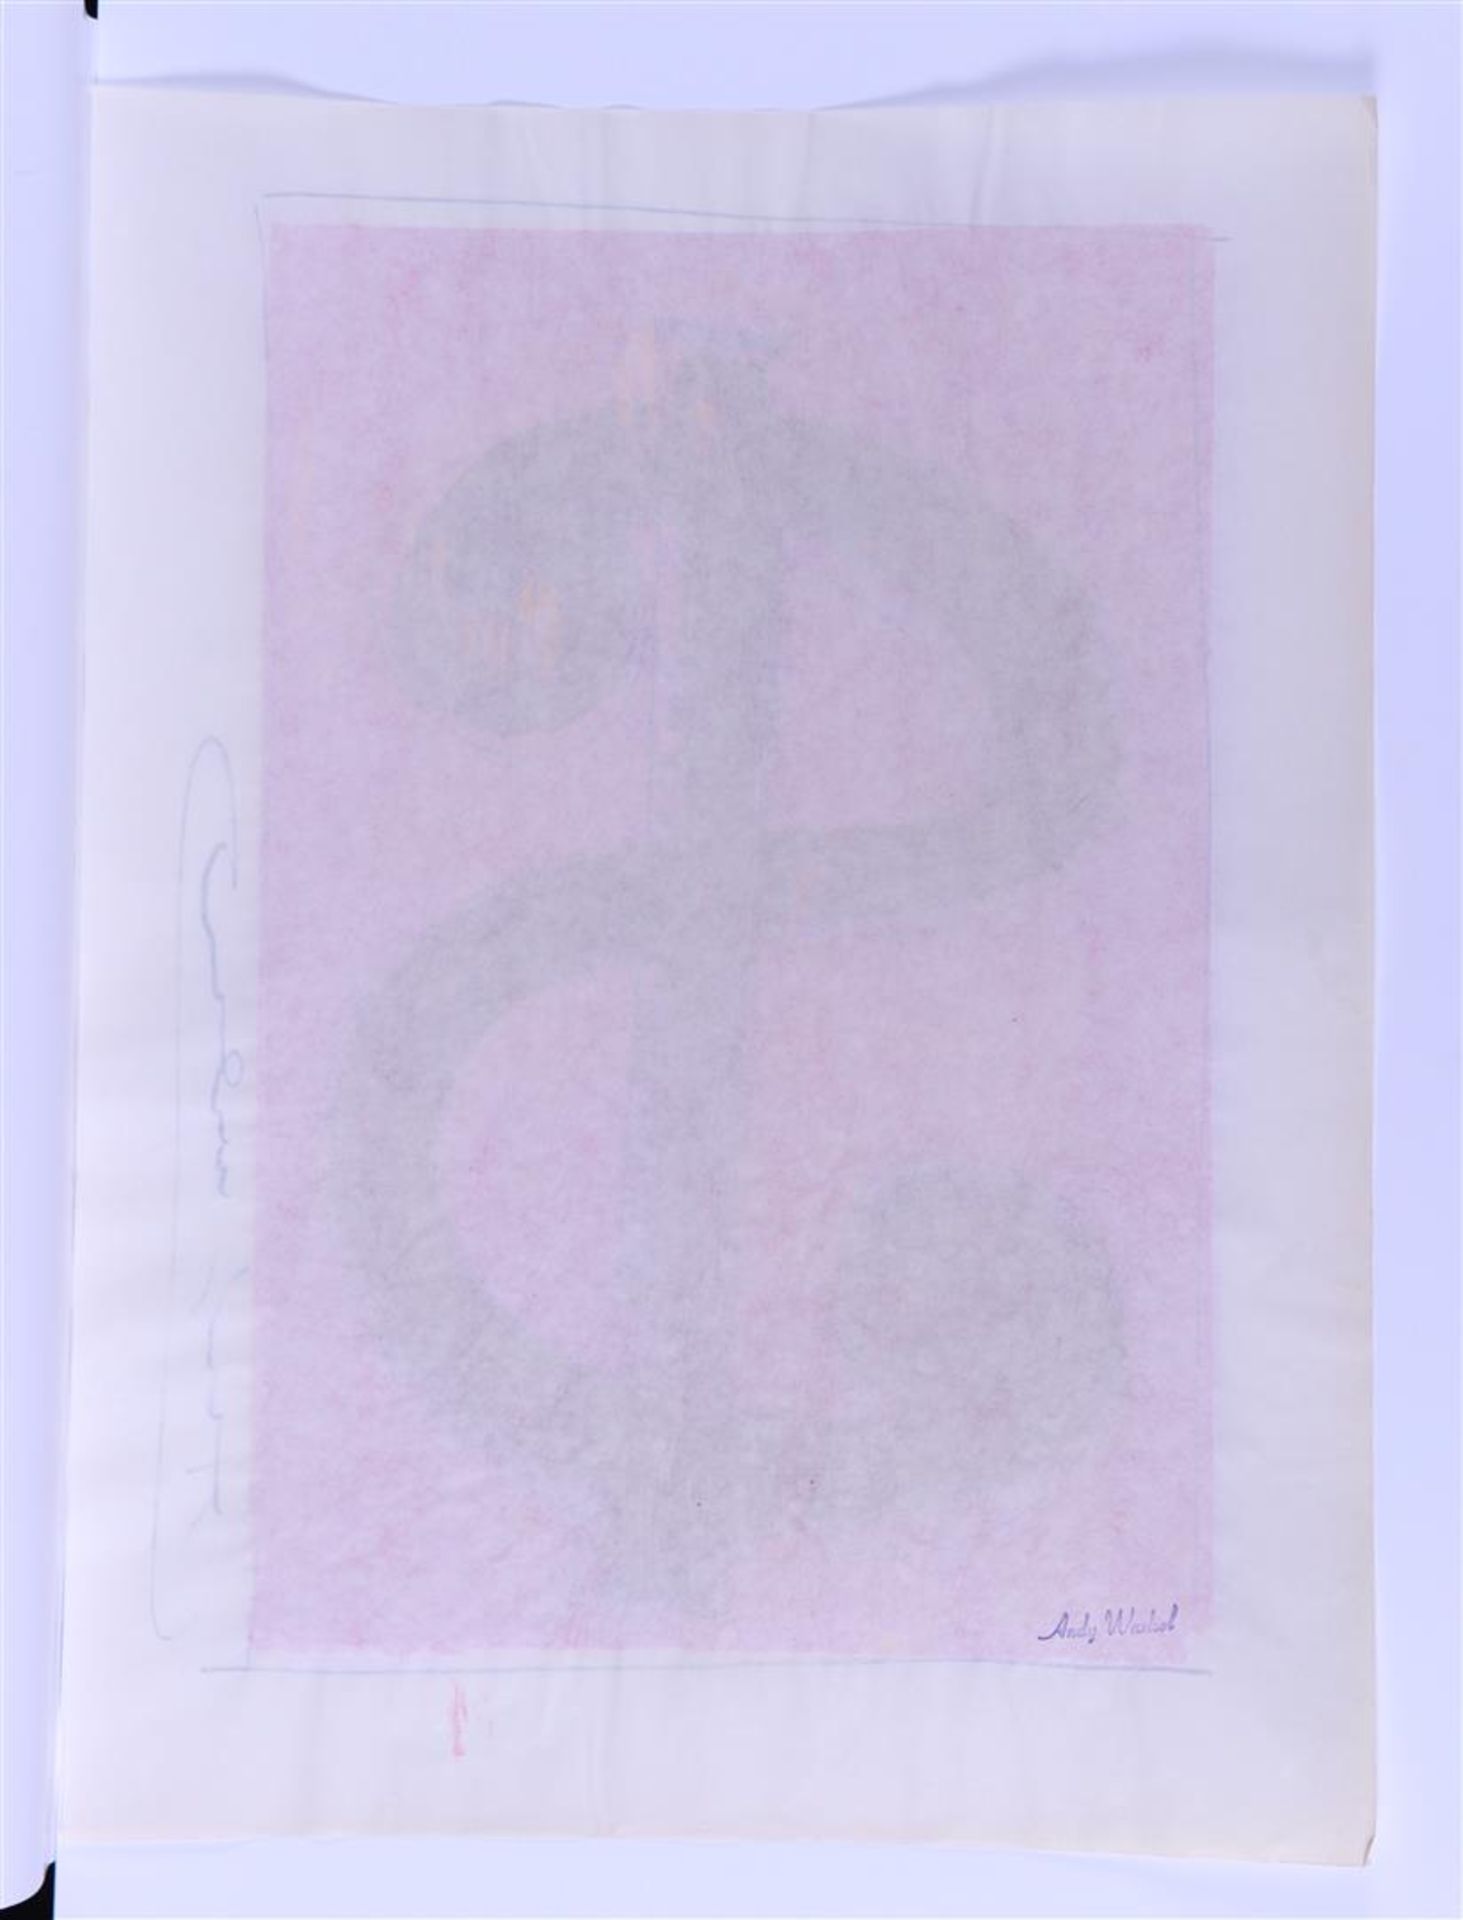 Andy Warhol Pittsburg, Pennsylvania 1928 - 1987 New York) (after), Dollar Sign on red ground - Image 2 of 3